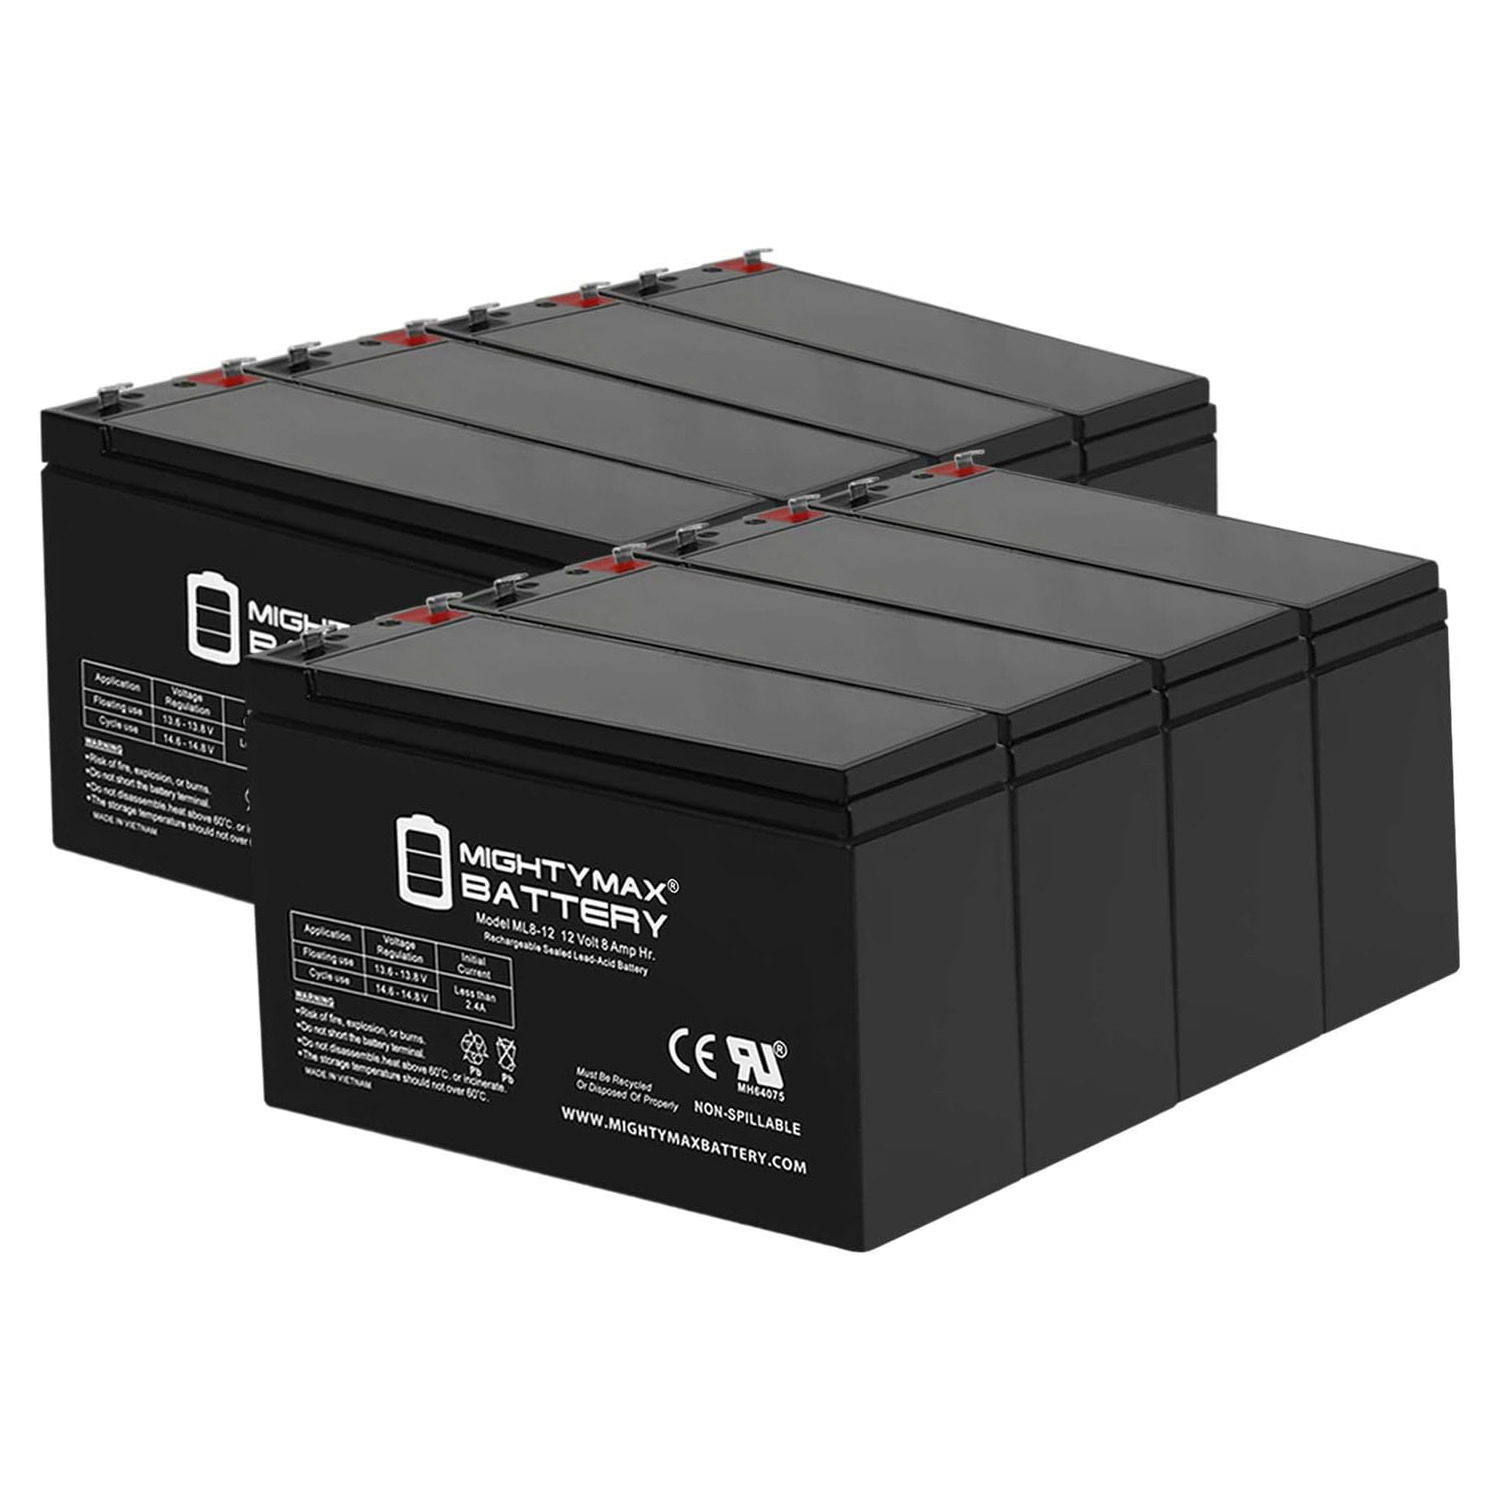 12V 8Ah Battery Replacement for Powerware 9150 One EBC-48 - 8 Pack